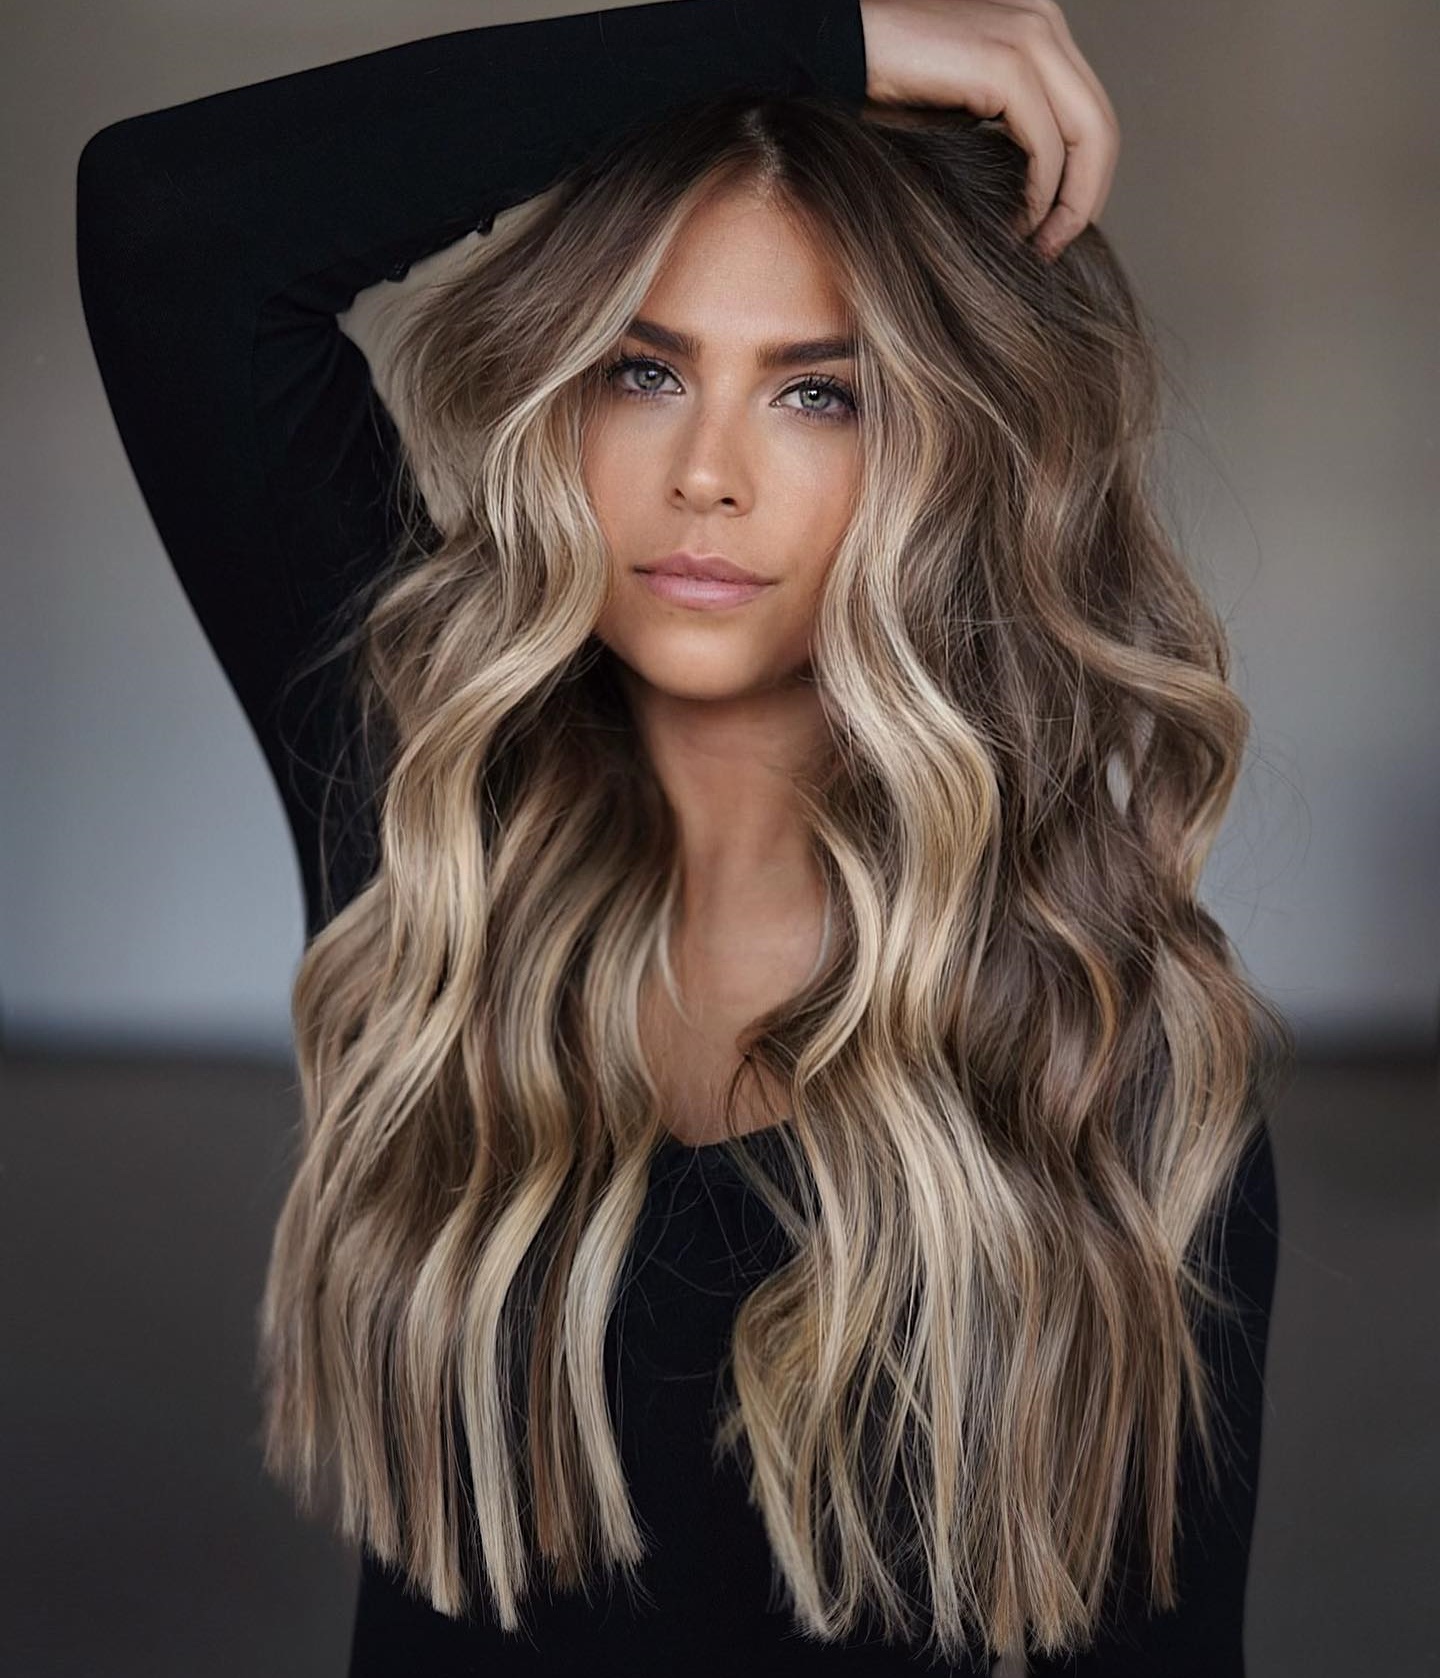 25 Top Dark Blonde Hair Ideas for any Length and Texture - Hairstylery